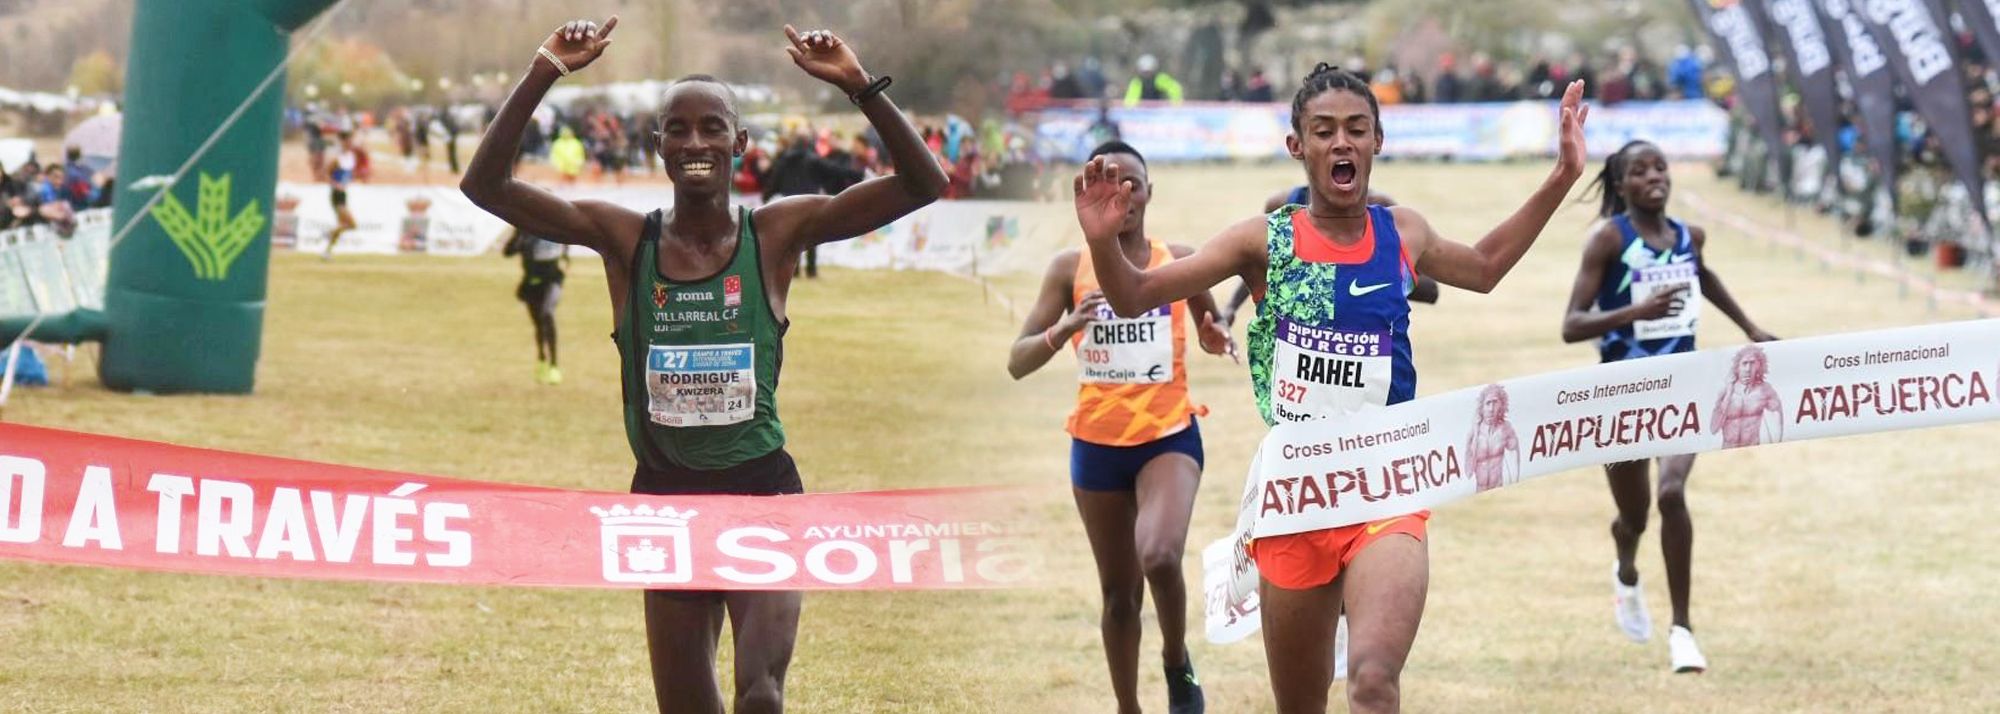 Top-class competition continues with the return of the World Athletics Cross Country Tour